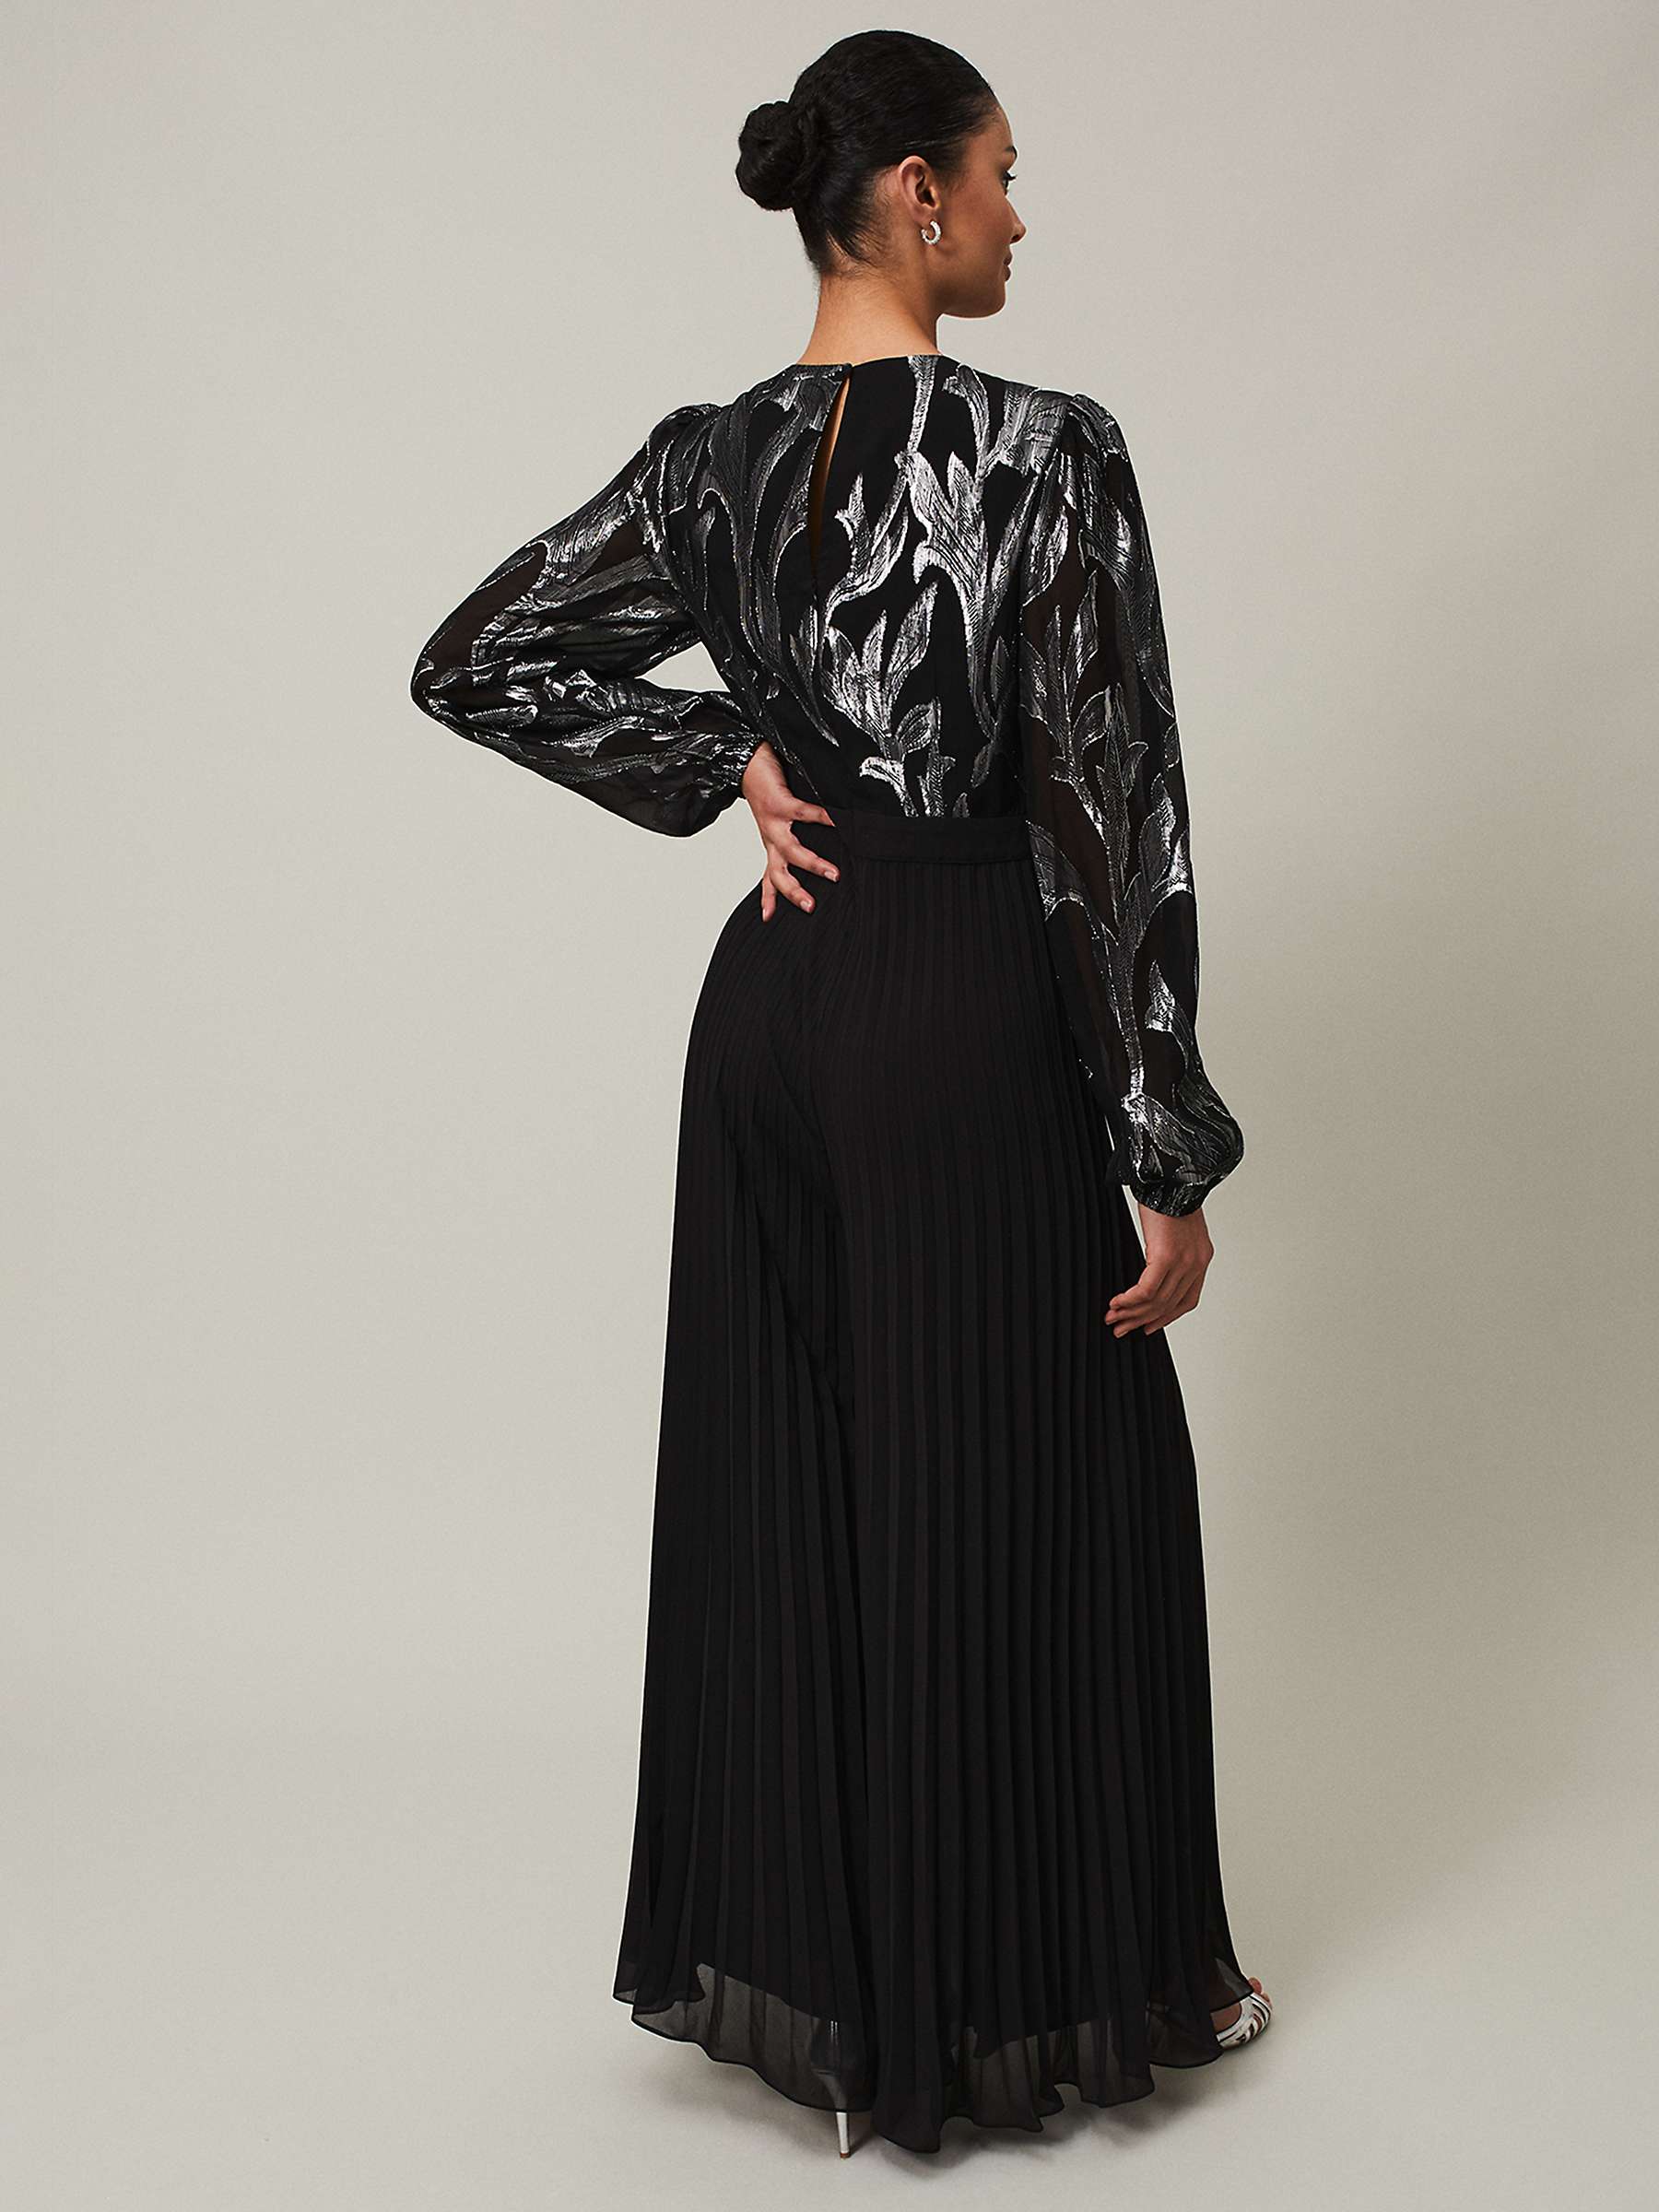 Buy Phase Eight Althea Wide Leg Jumpsuit, Black/Silver Online at johnlewis.com